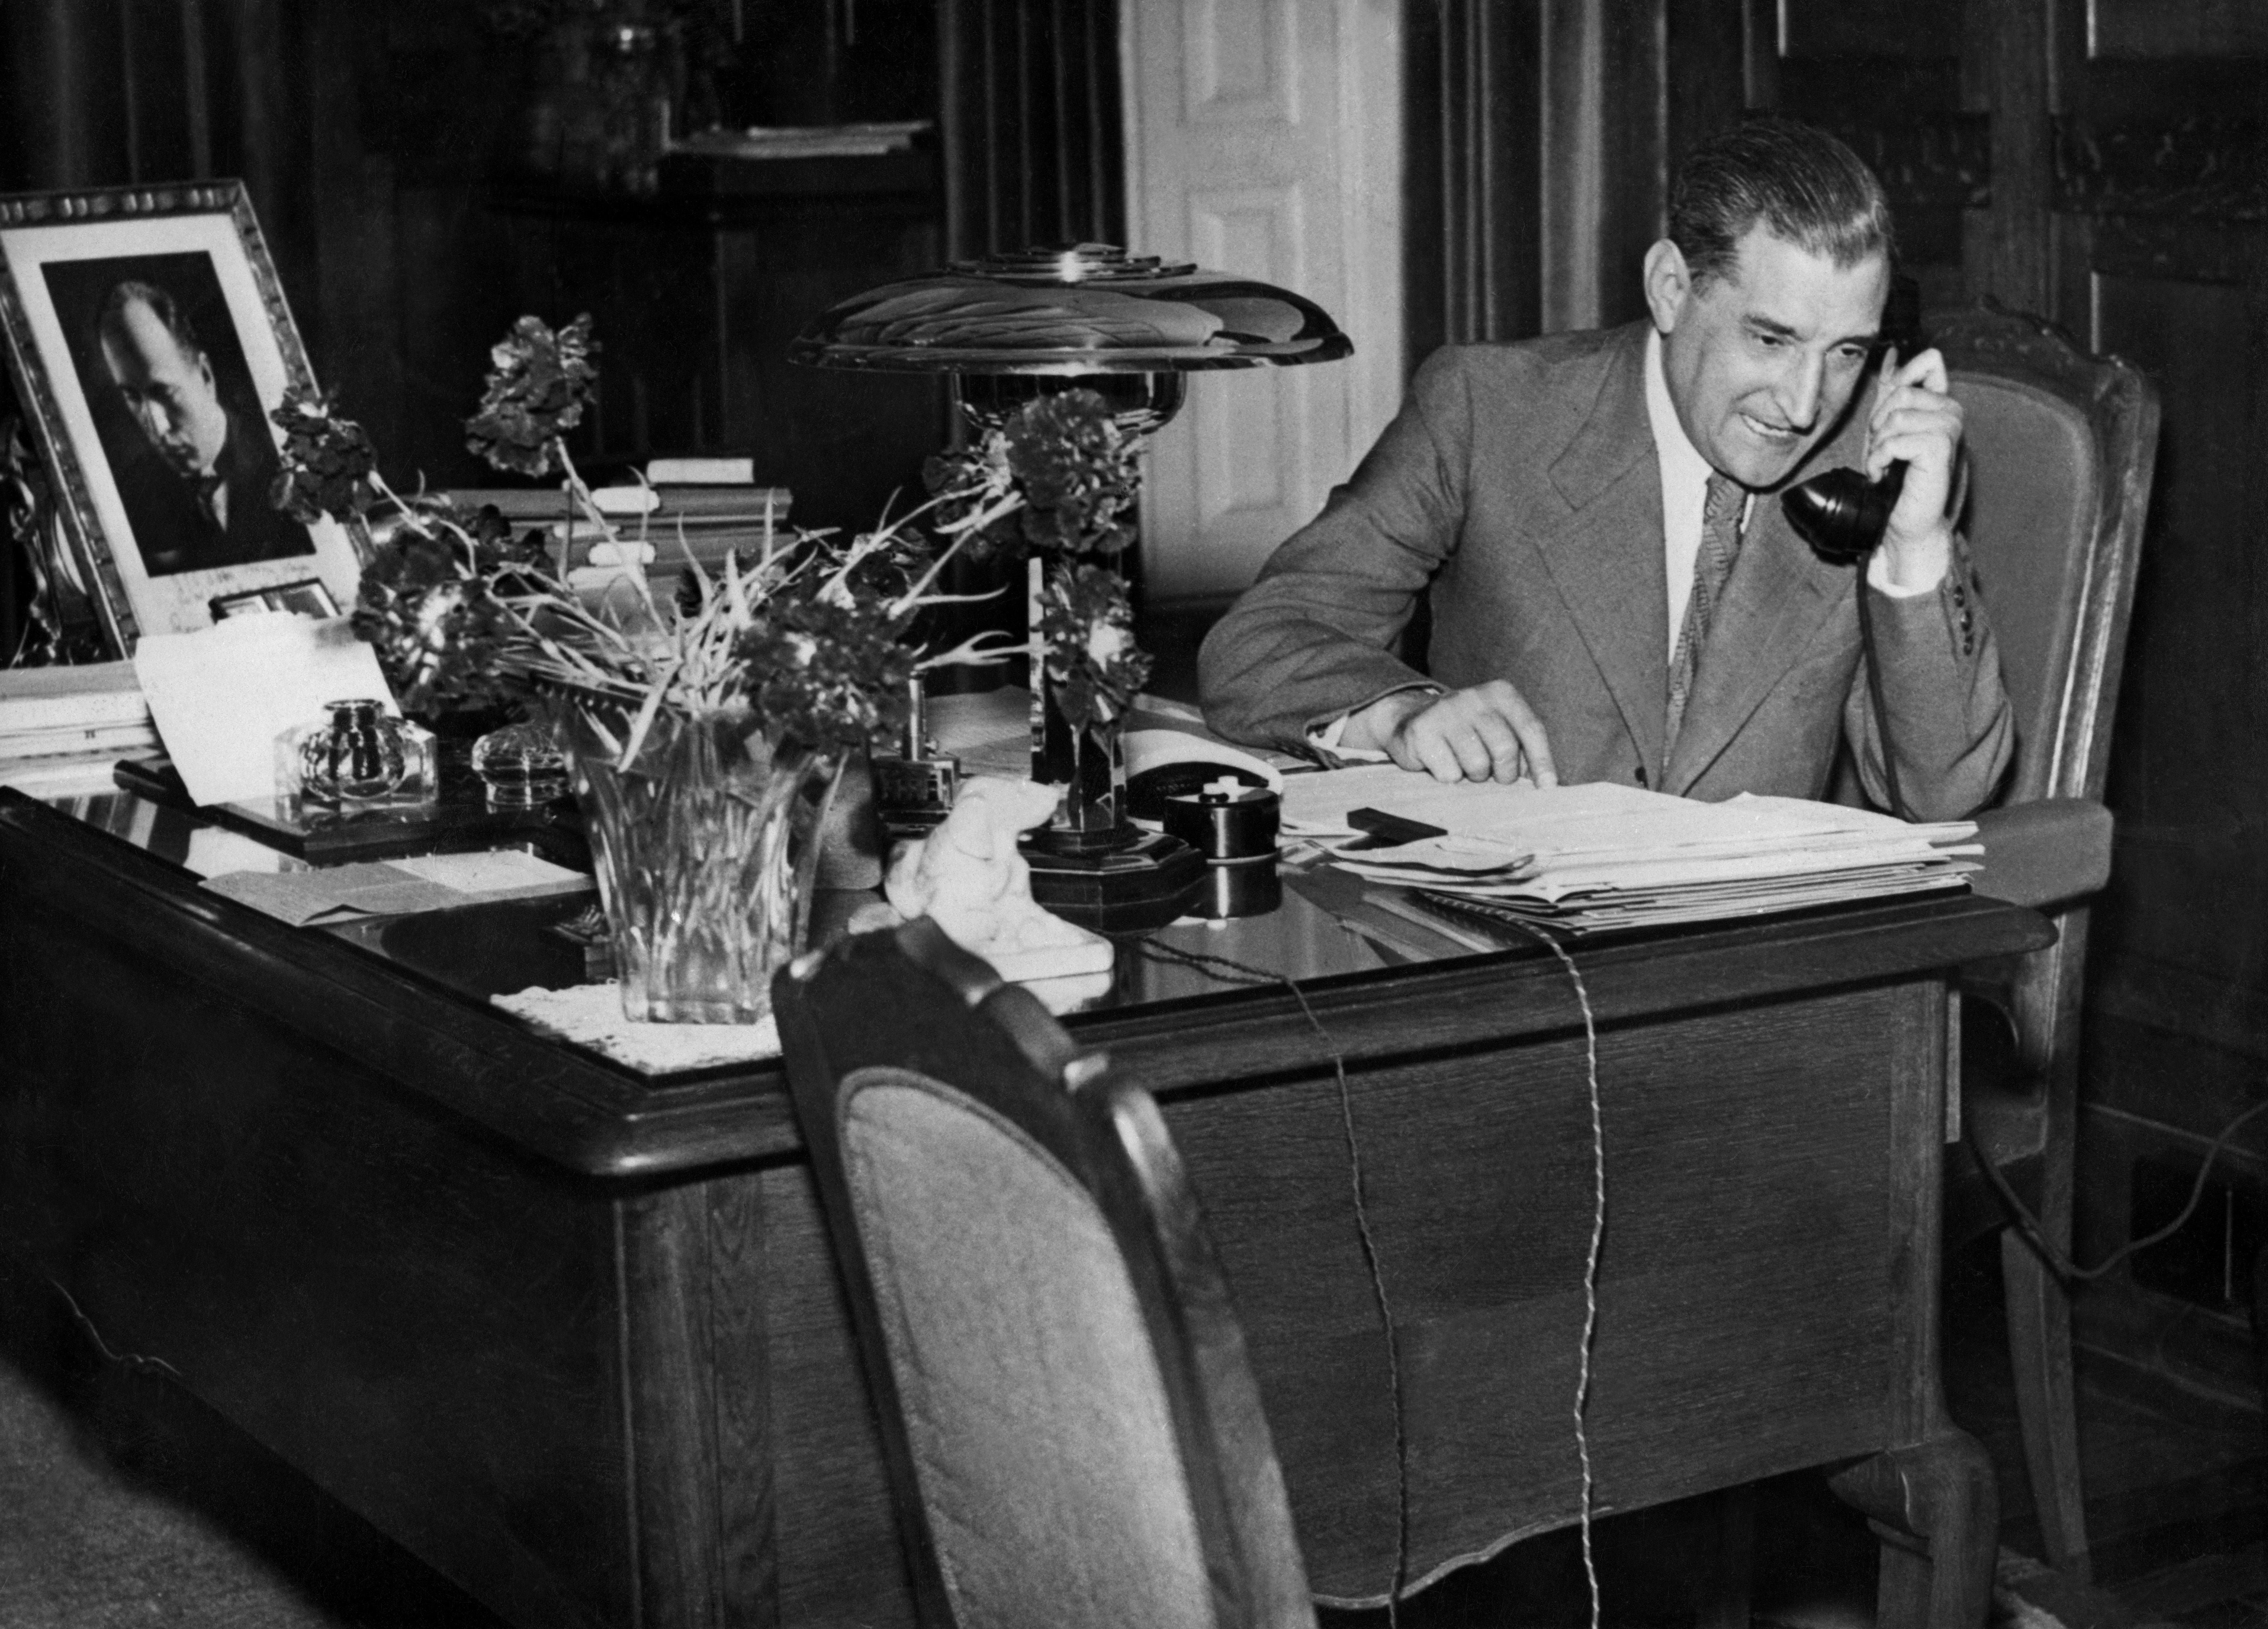 Archive photo: The late Portuguese president Antonio de Oliveira Salazar talking on the phone at his desk